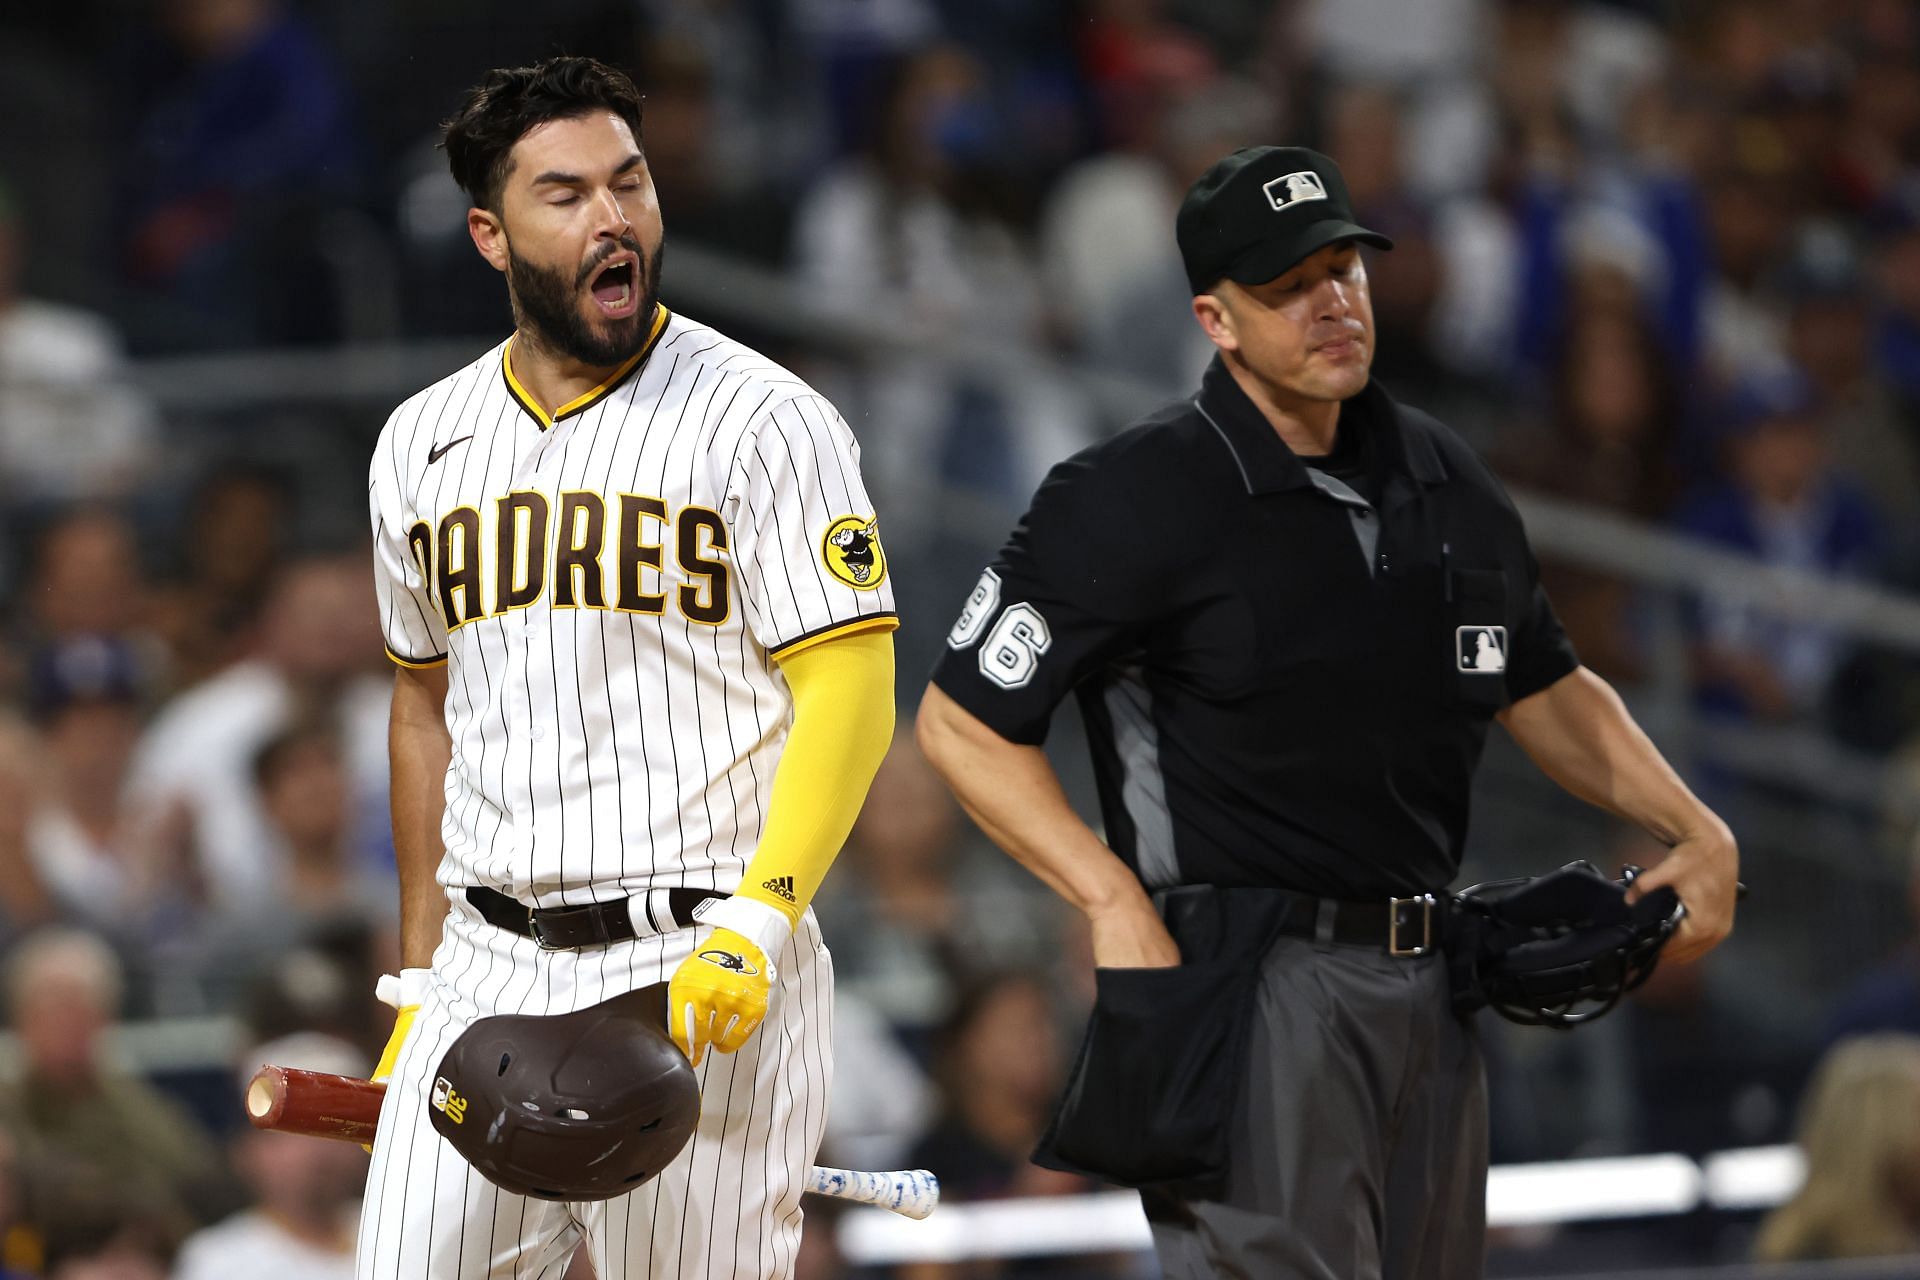 Should Chicago Cubs Continue to Roster Eric Hosmer Over Top